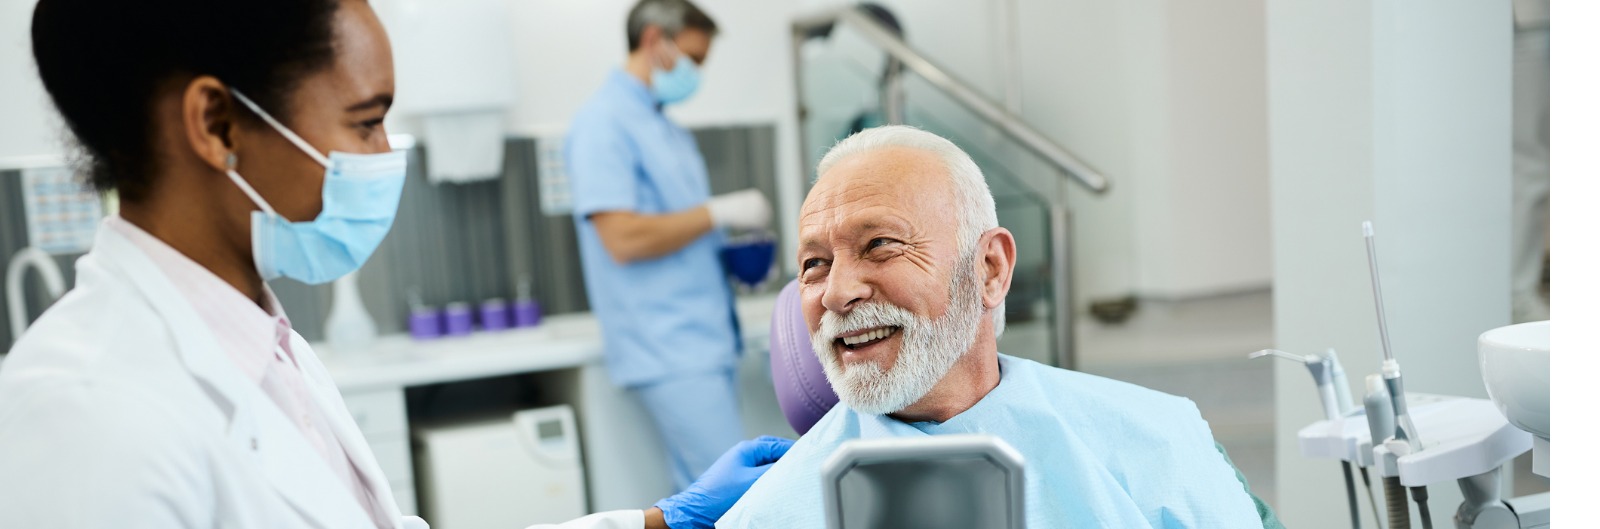 Smiling man and Dentist